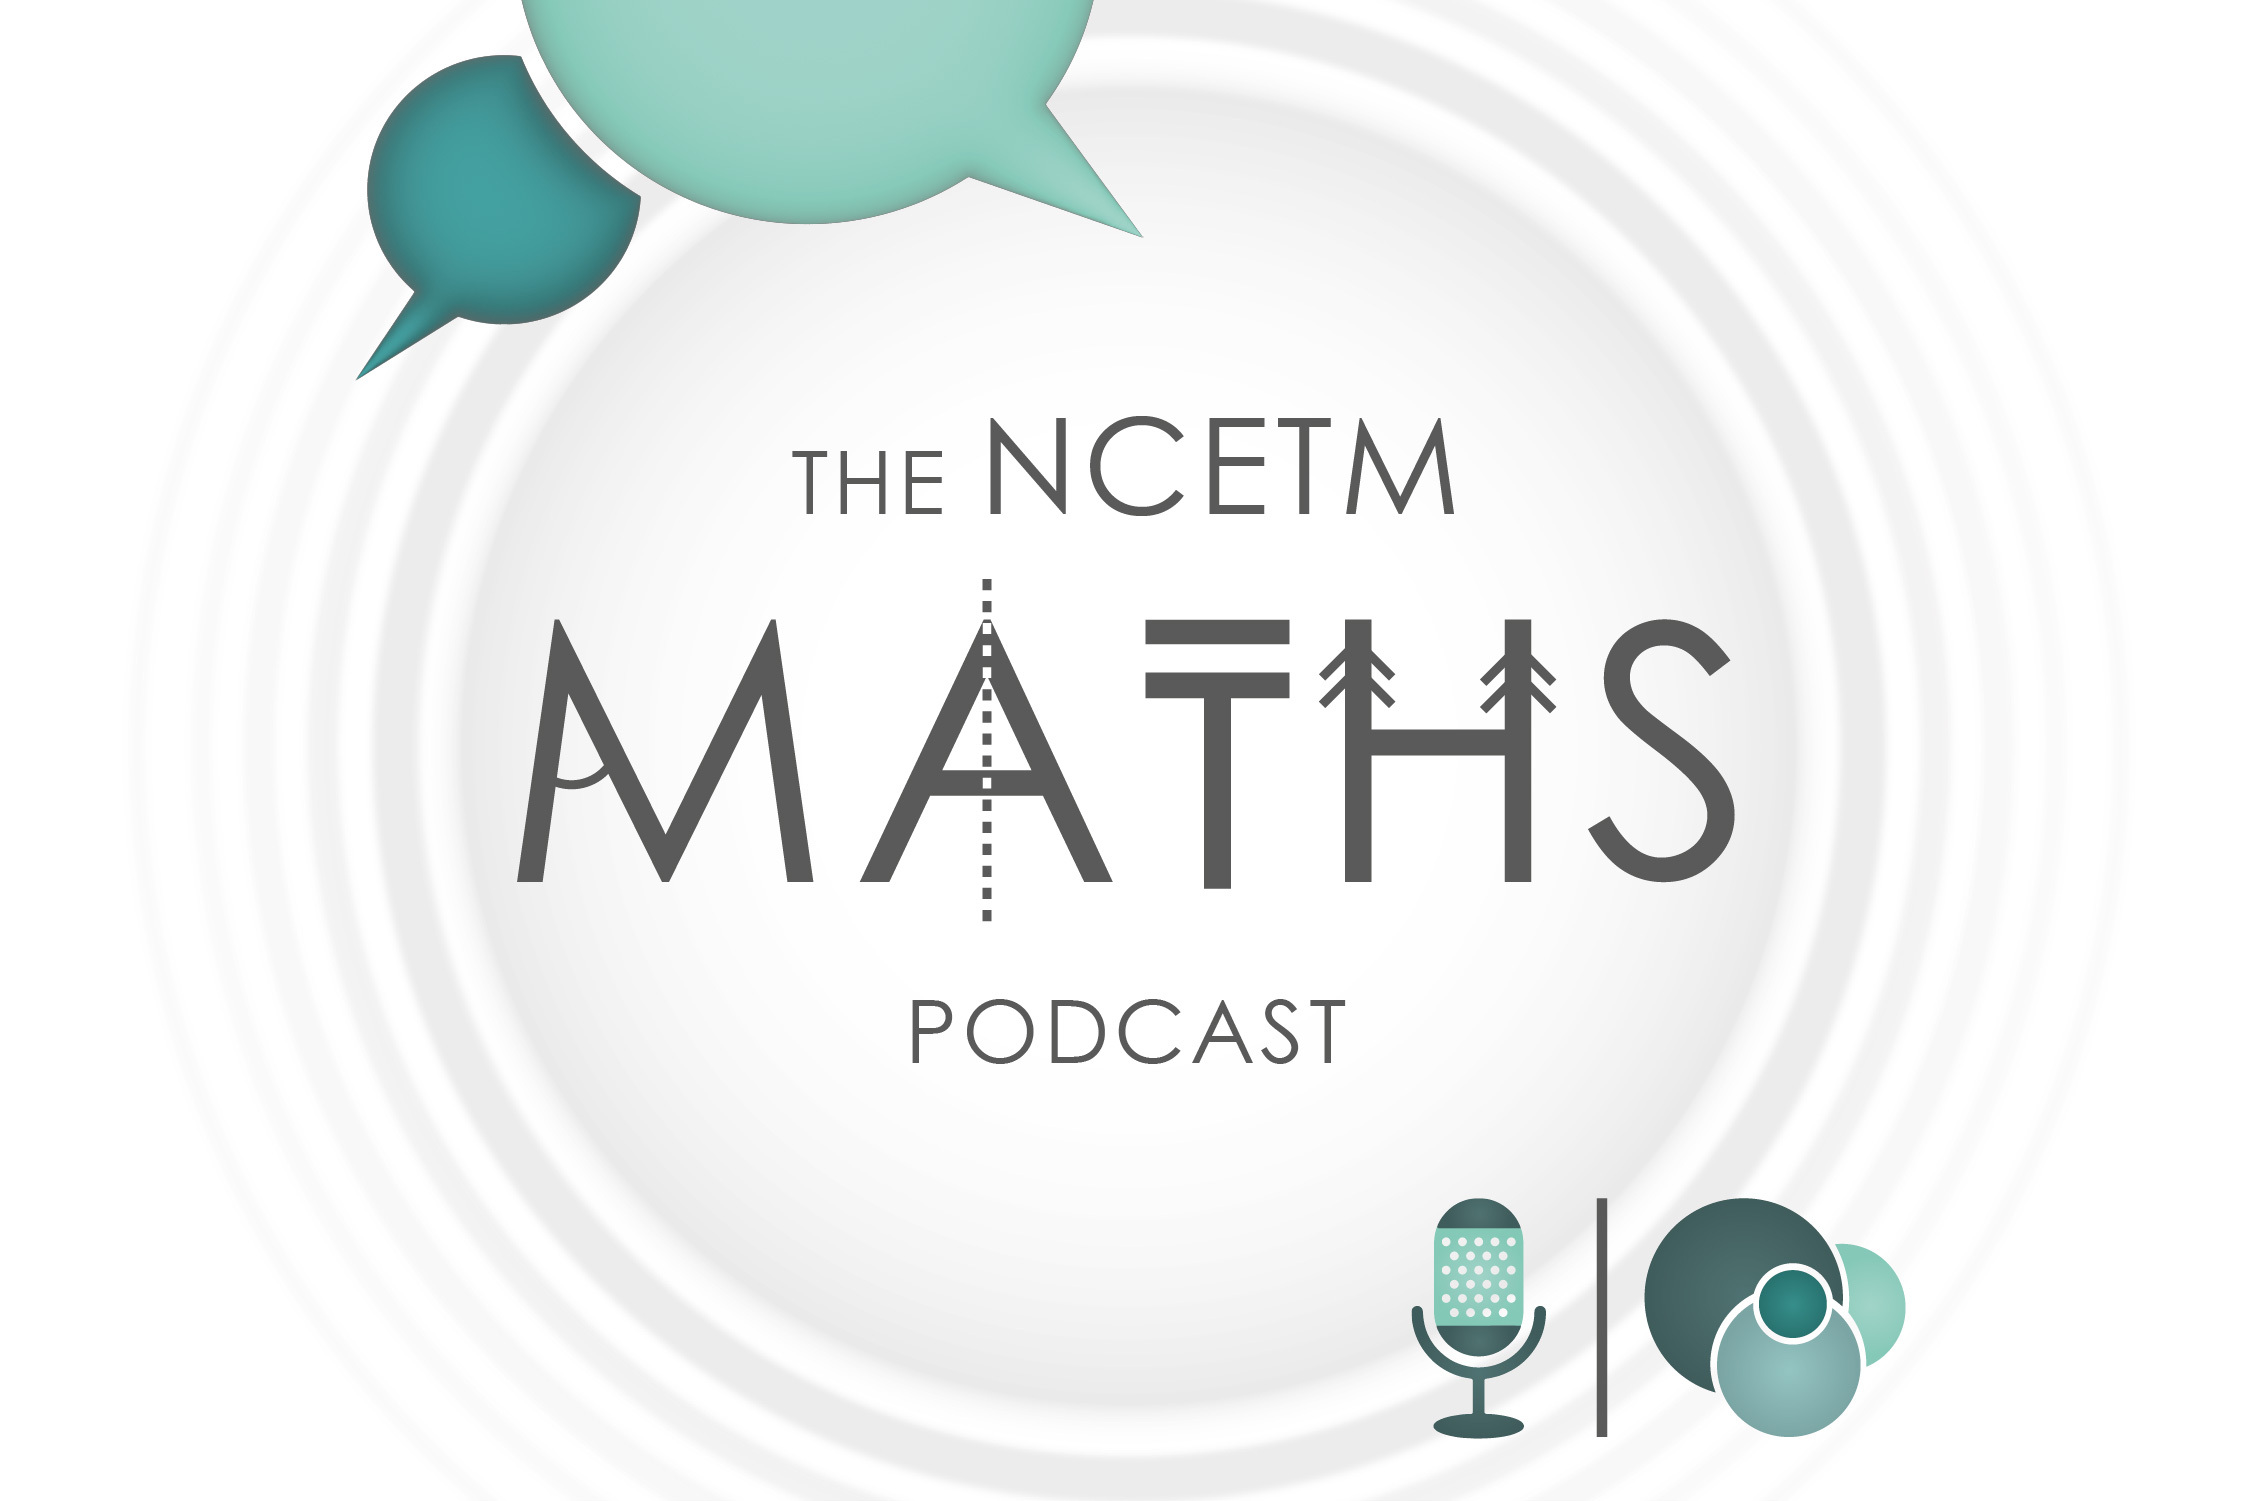 The NCETM Maths Podcast – have you listened yet?